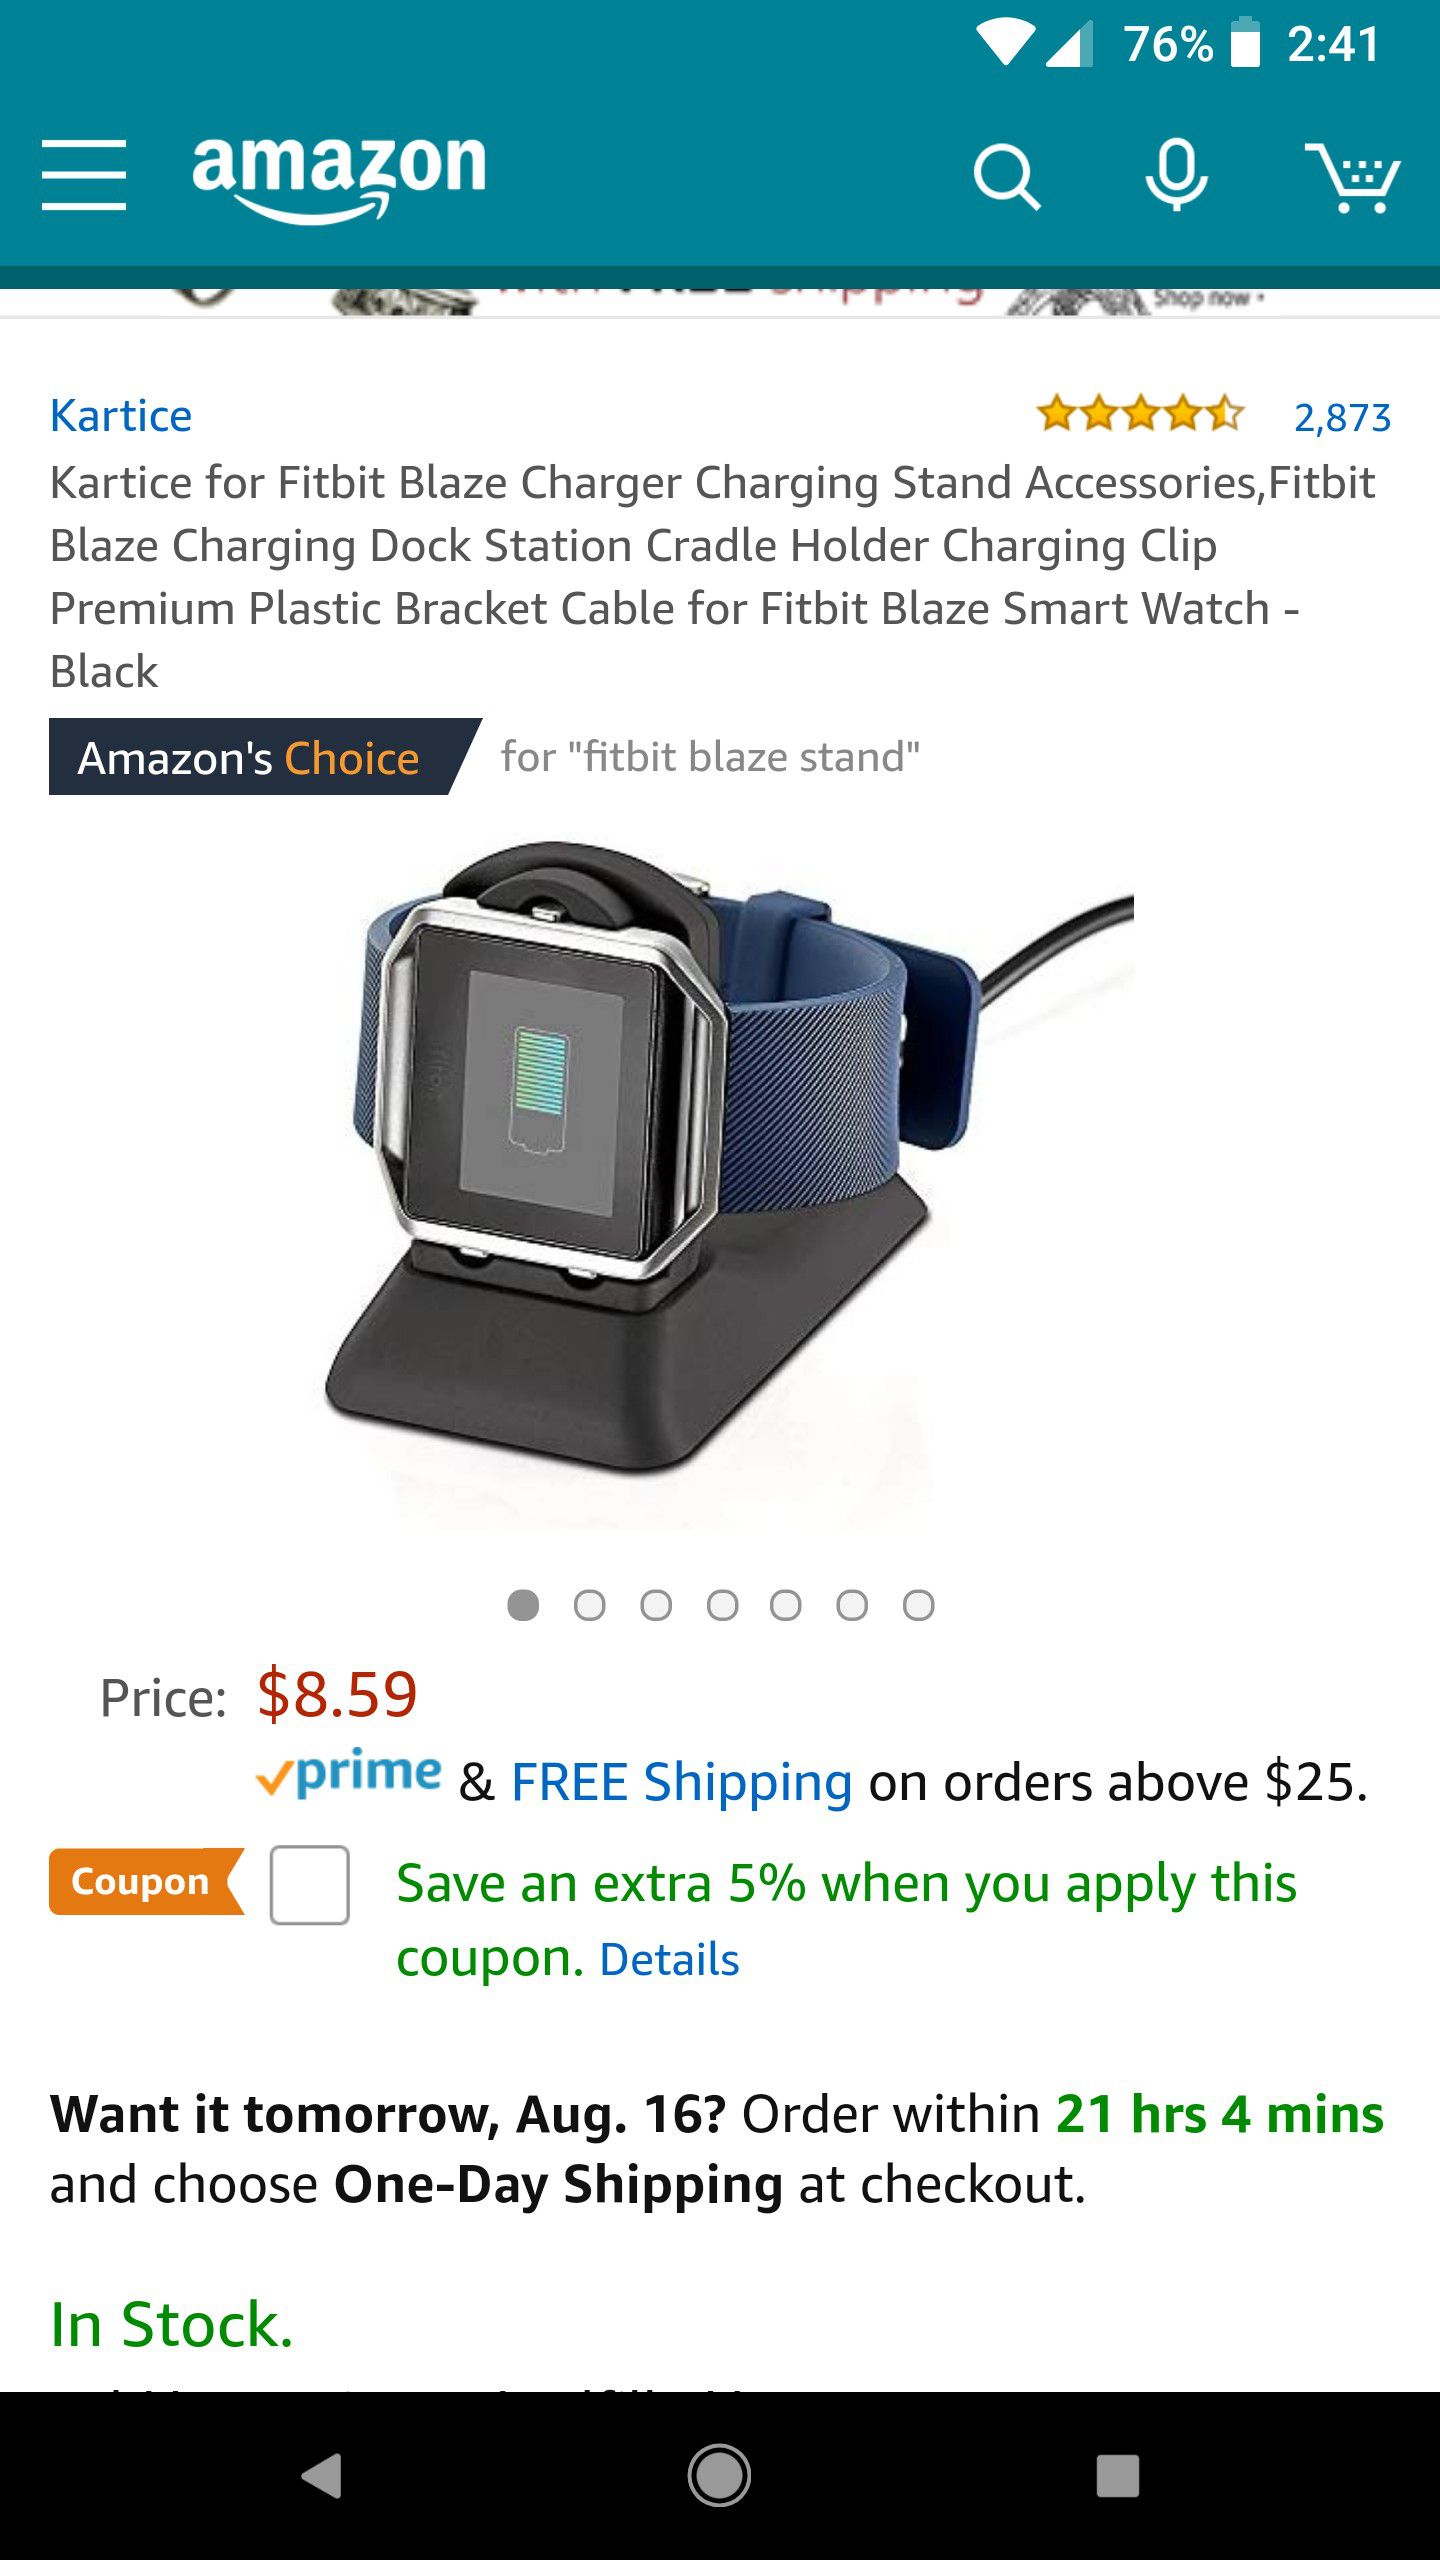 Kartice Charging Stand Compatible with Fitbit Blaze Charger Accessories,Fitbit Blaze Charging Dock Station Cradle Holder Charging Clip Bracket Cable for Fitbit Blaze SmartWatch 